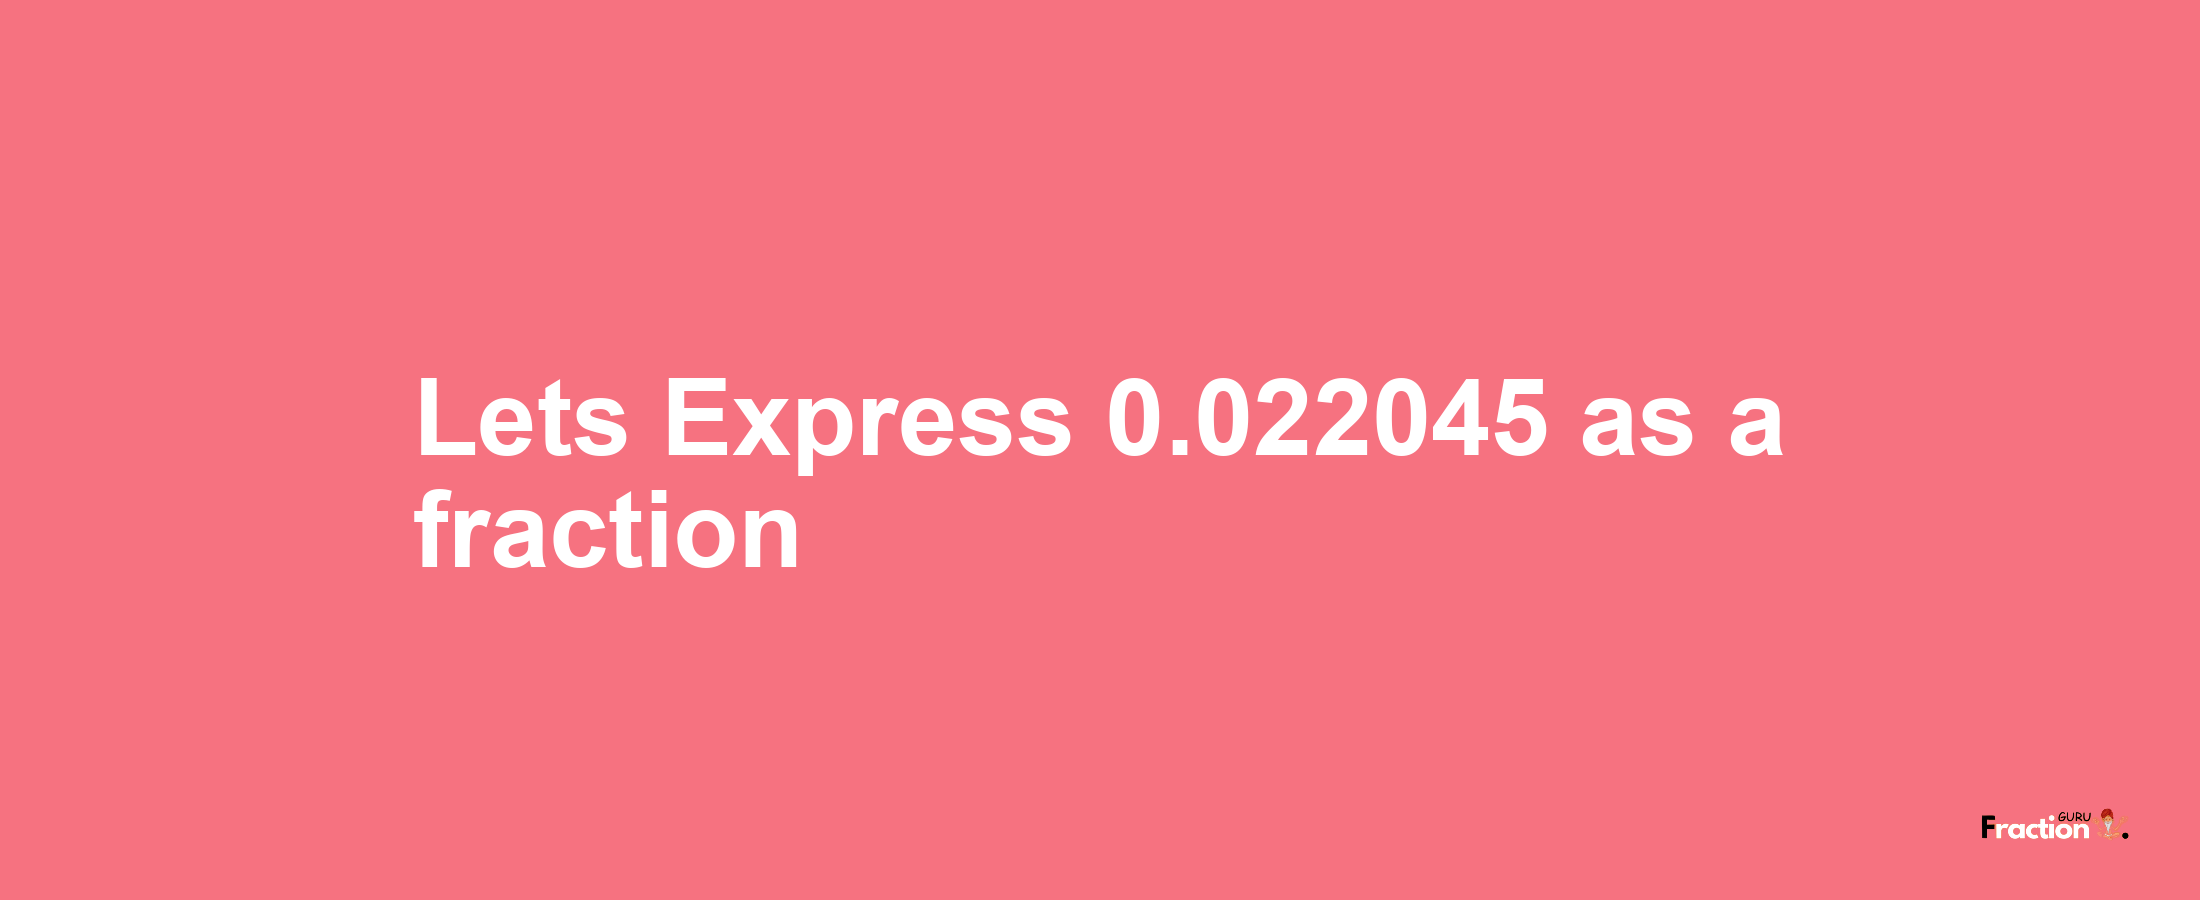 Lets Express 0.022045 as afraction